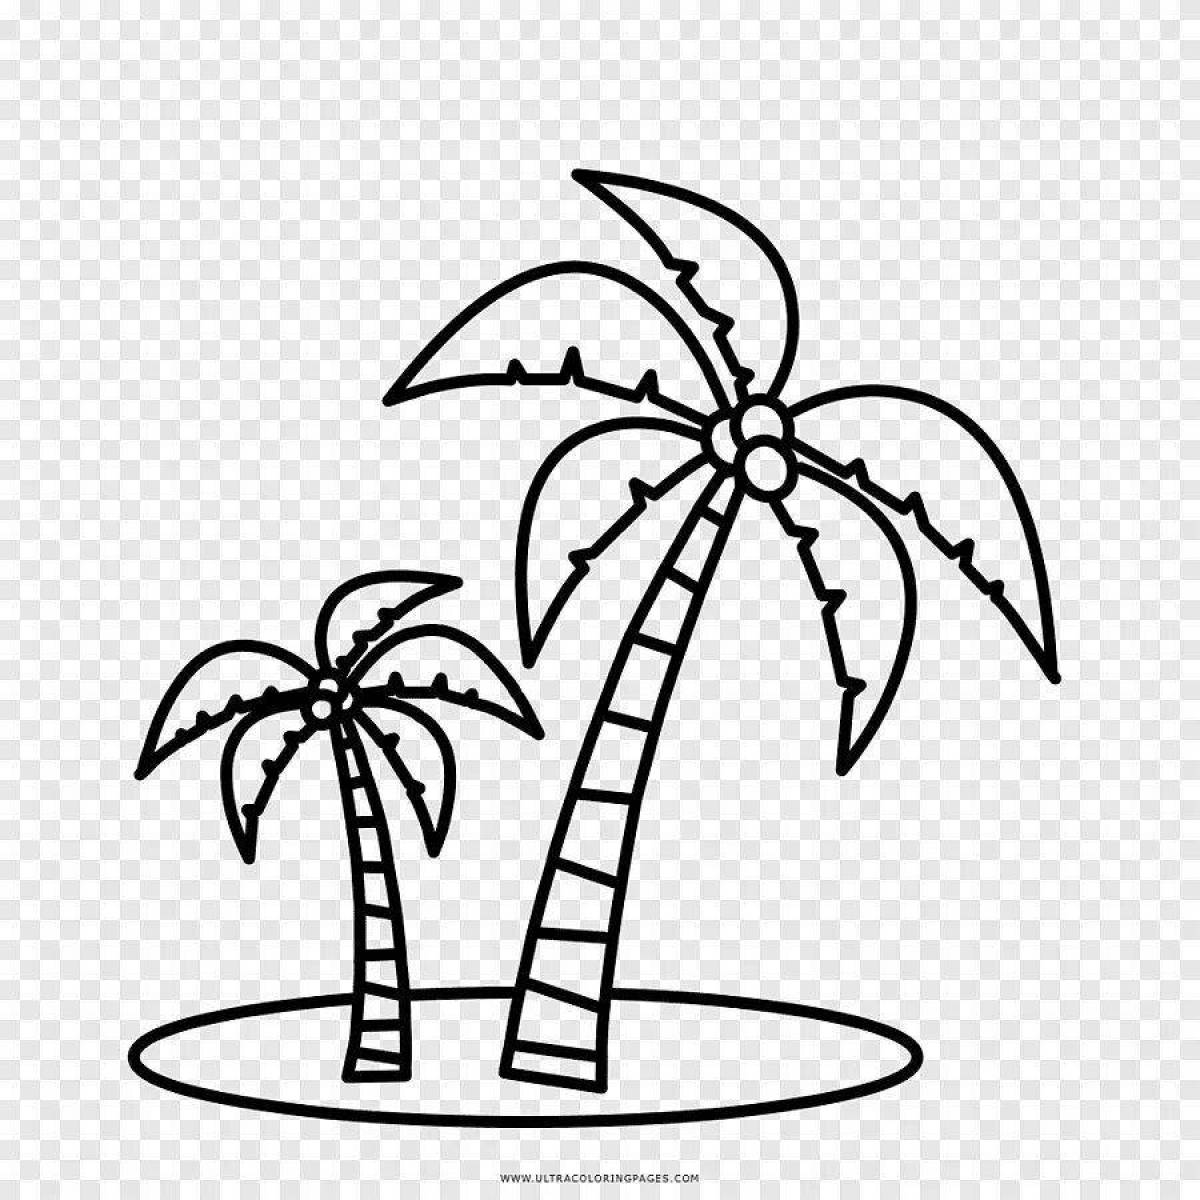 Playful palm tree coloring page for kids